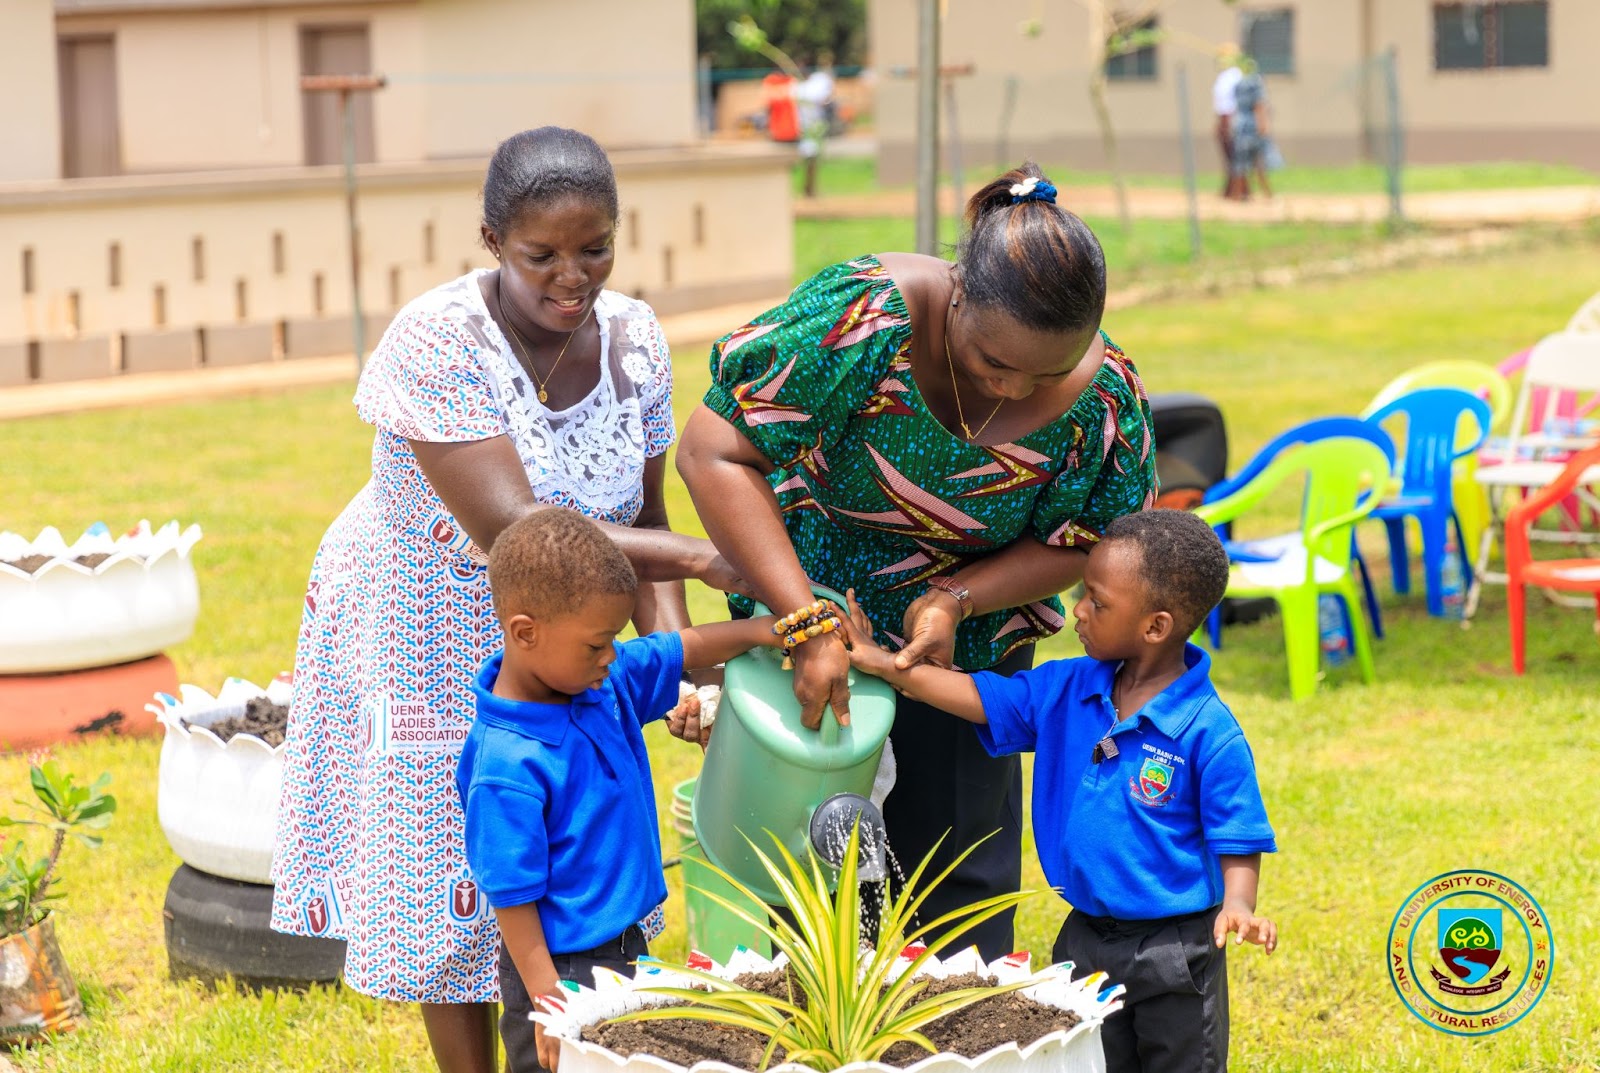 UENR Ladies Association and UENR Basic School Plant Trees to Observe International Women’s Day, University of Energy and Natural Resources - Sunyani